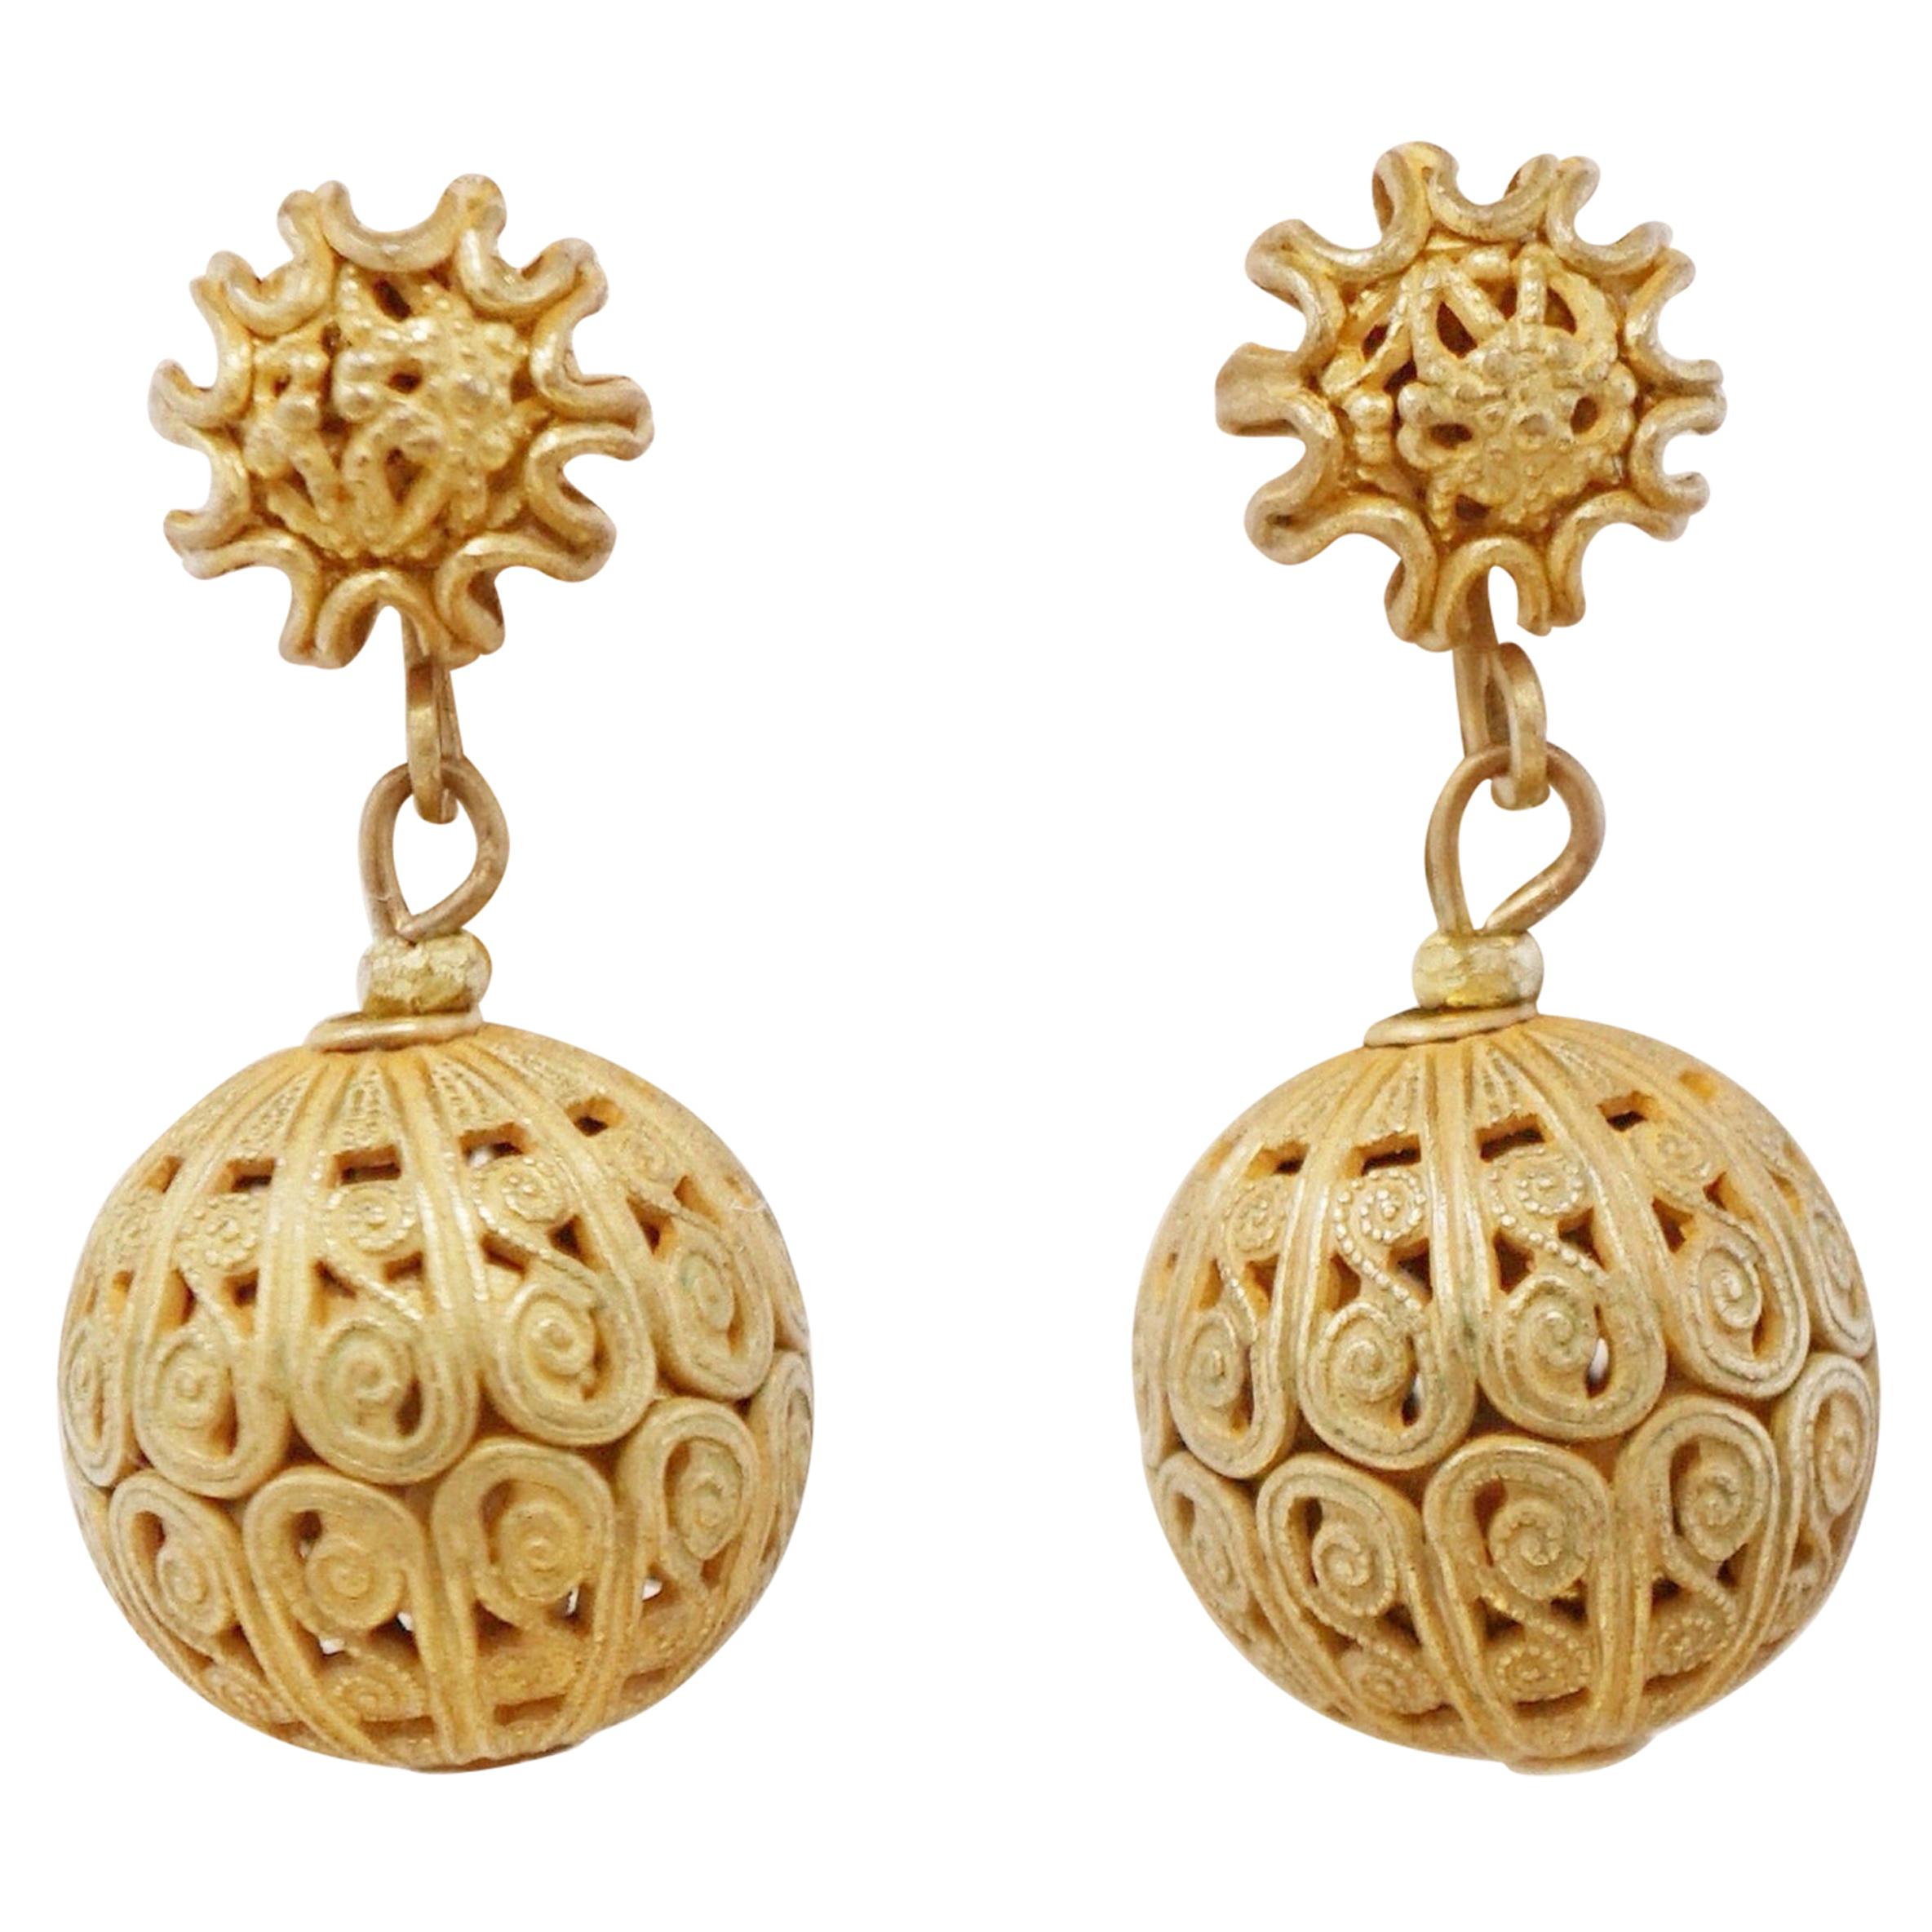 Vintage Ornate Golden Ball Dangle Earrings by Miriam Haskell, 1950s